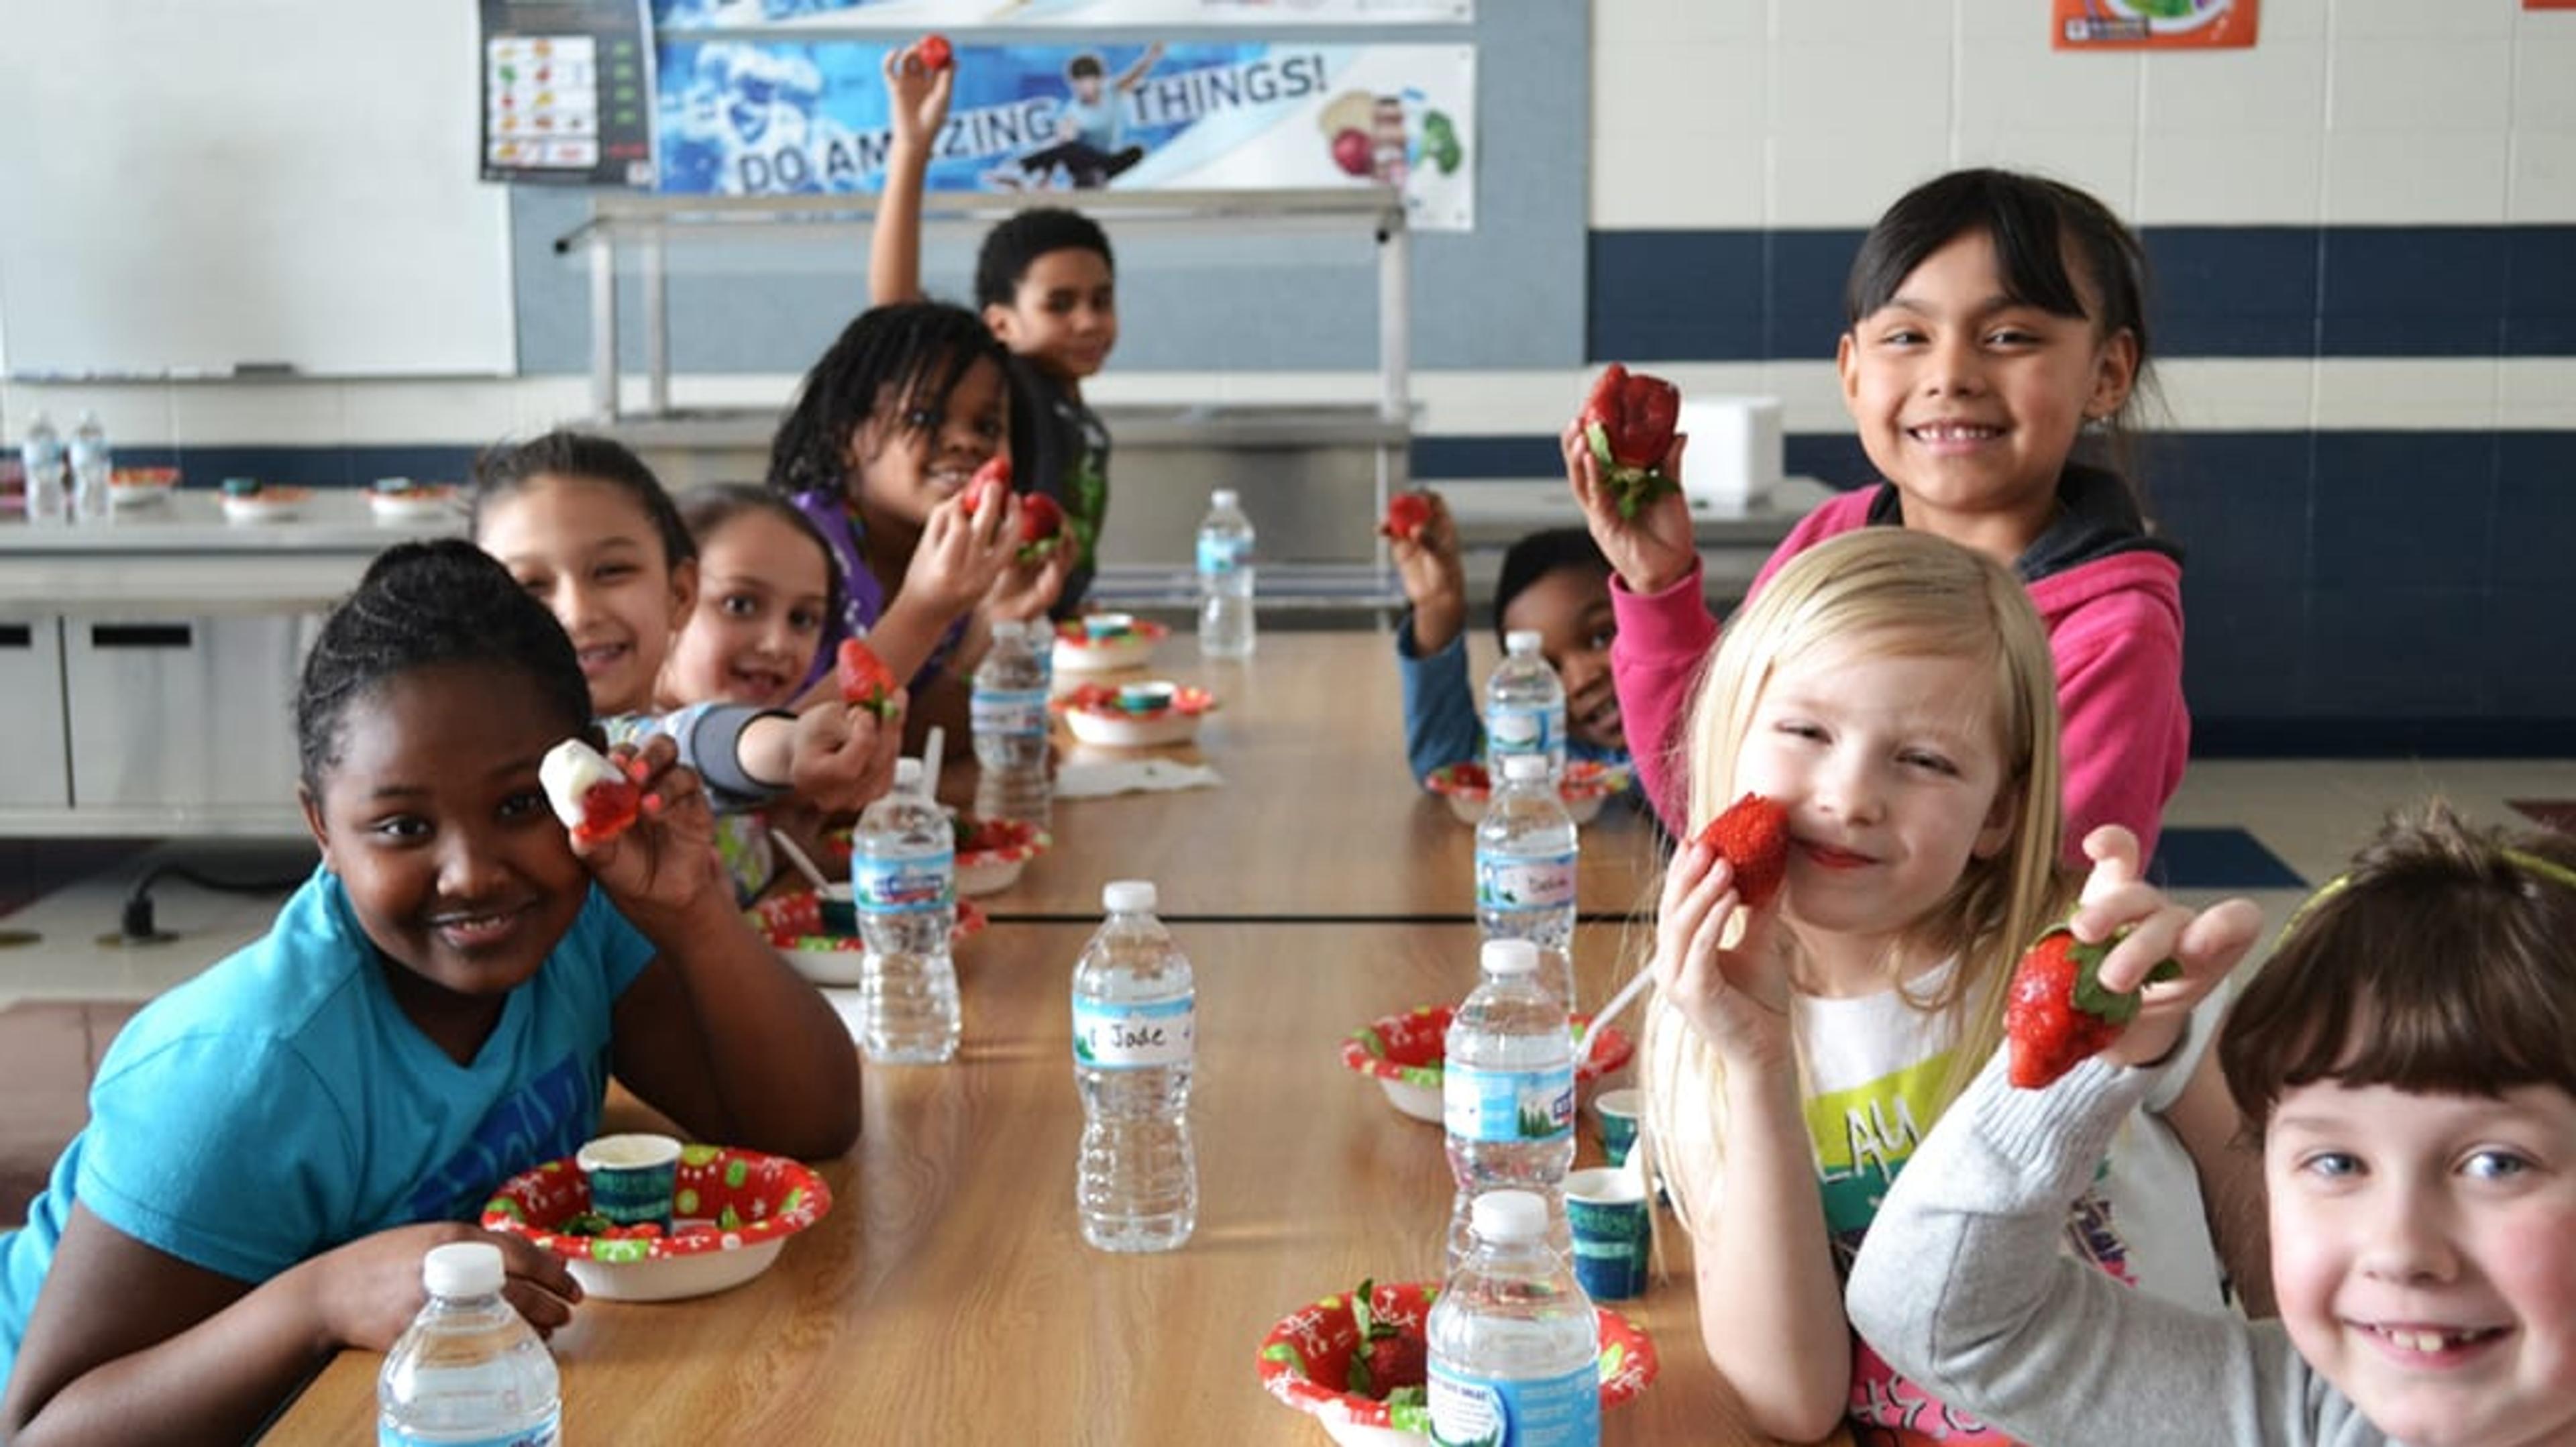 Elementary students smiling gathered at a lunch table with healthy foods